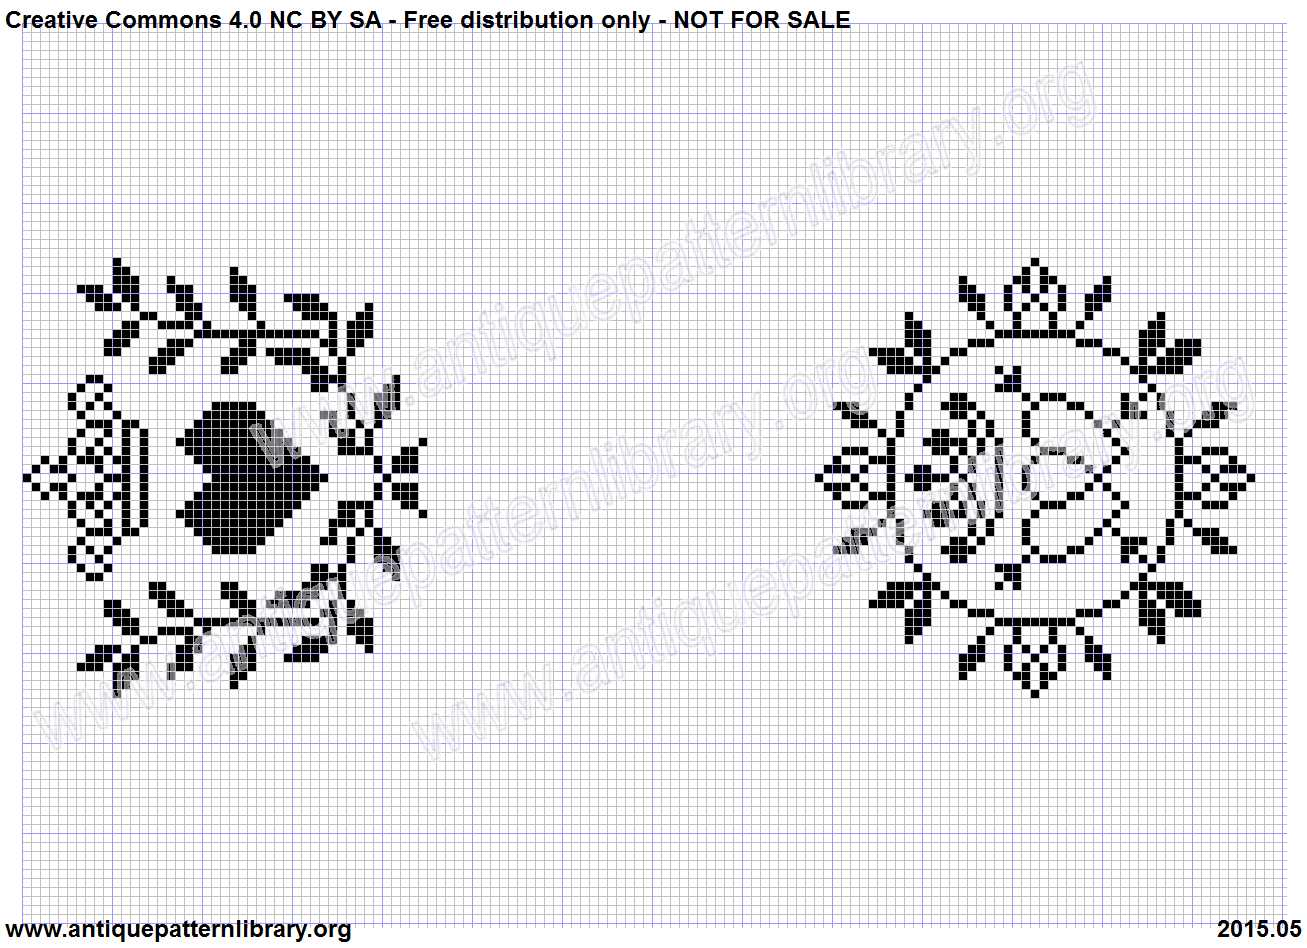 F-SF001 1730 Embroidery Pattern book